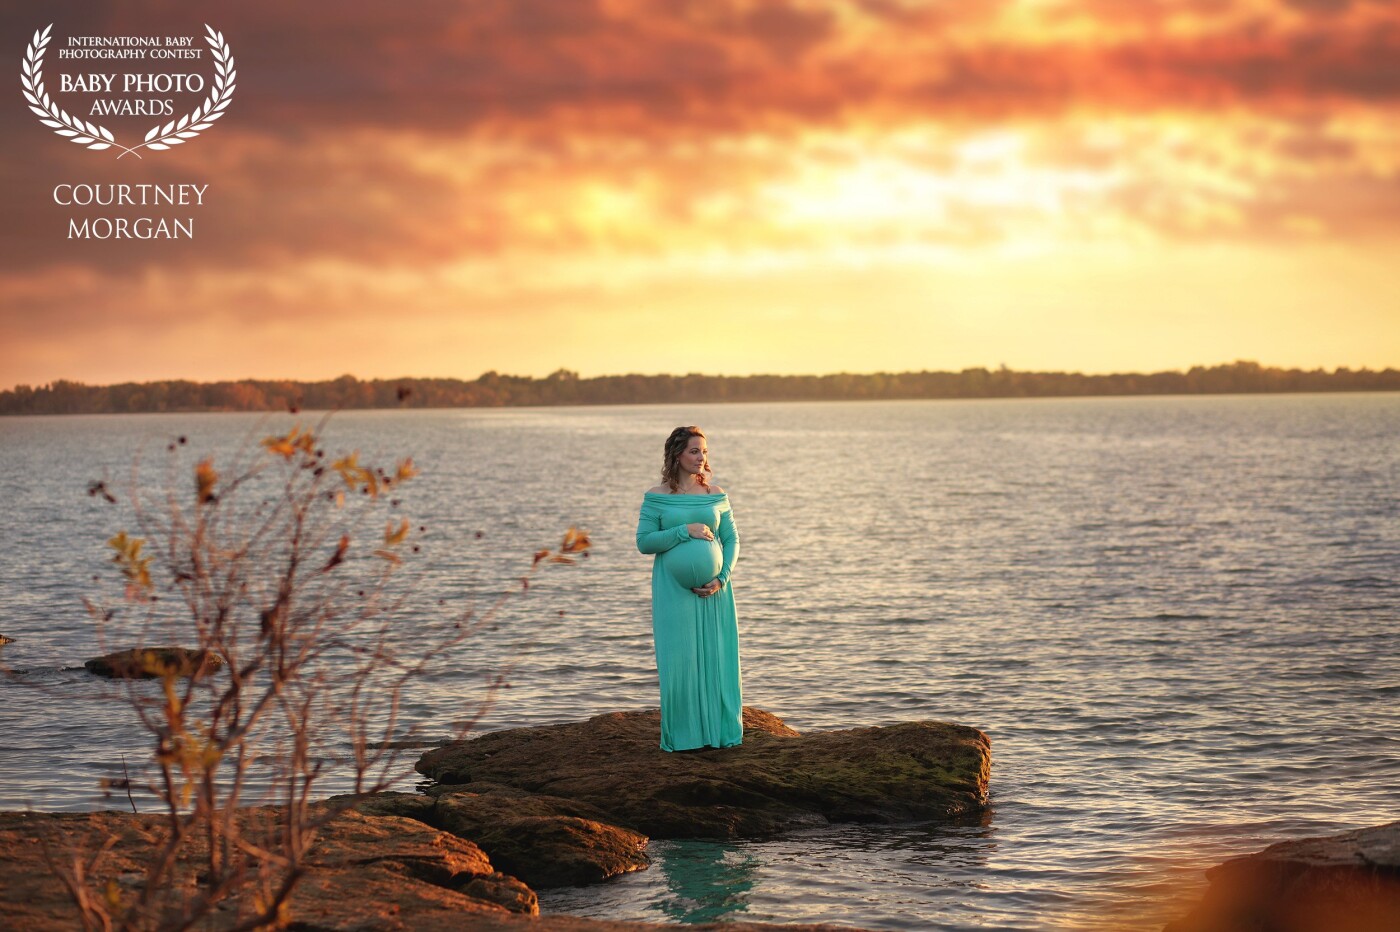 Texas skies provide some of the most amazing sunsets.  Pair that with a beautiful mama-to-be, and you get something truly special.  